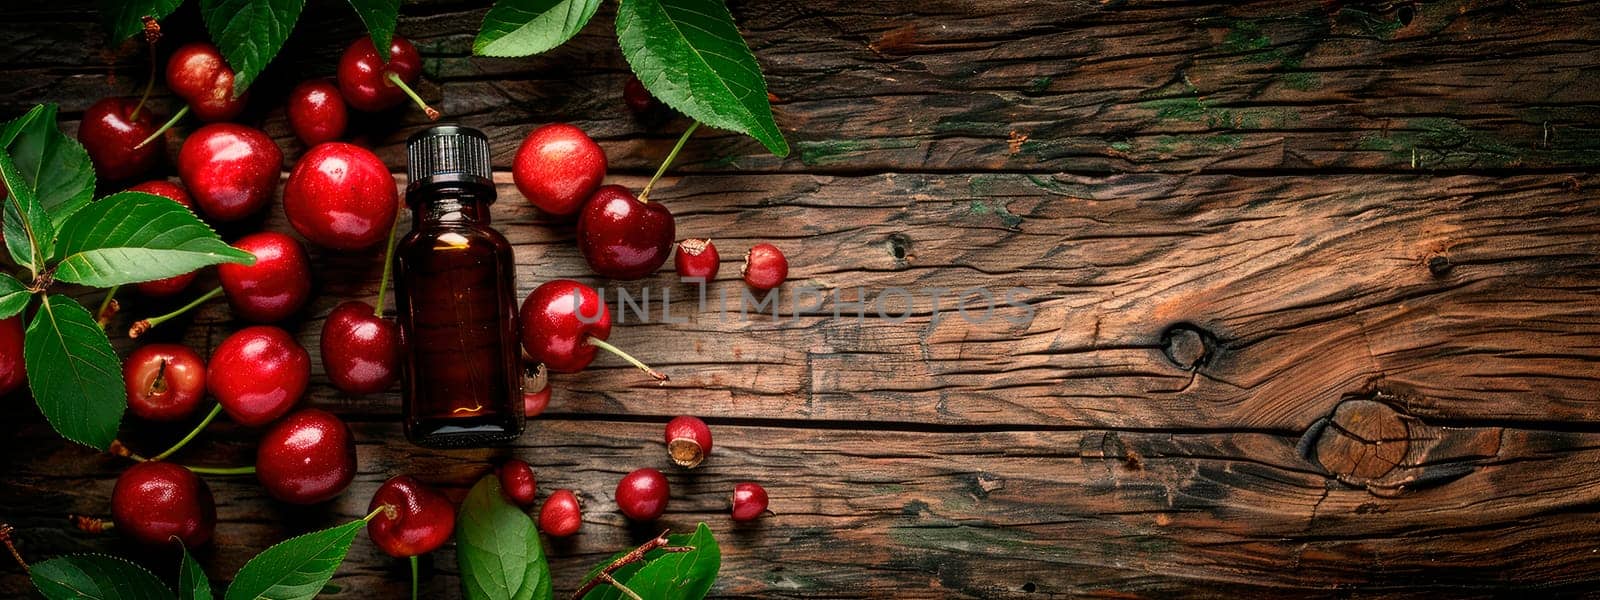 cherry essential oil in a bottle. Selective focus. by yanadjana